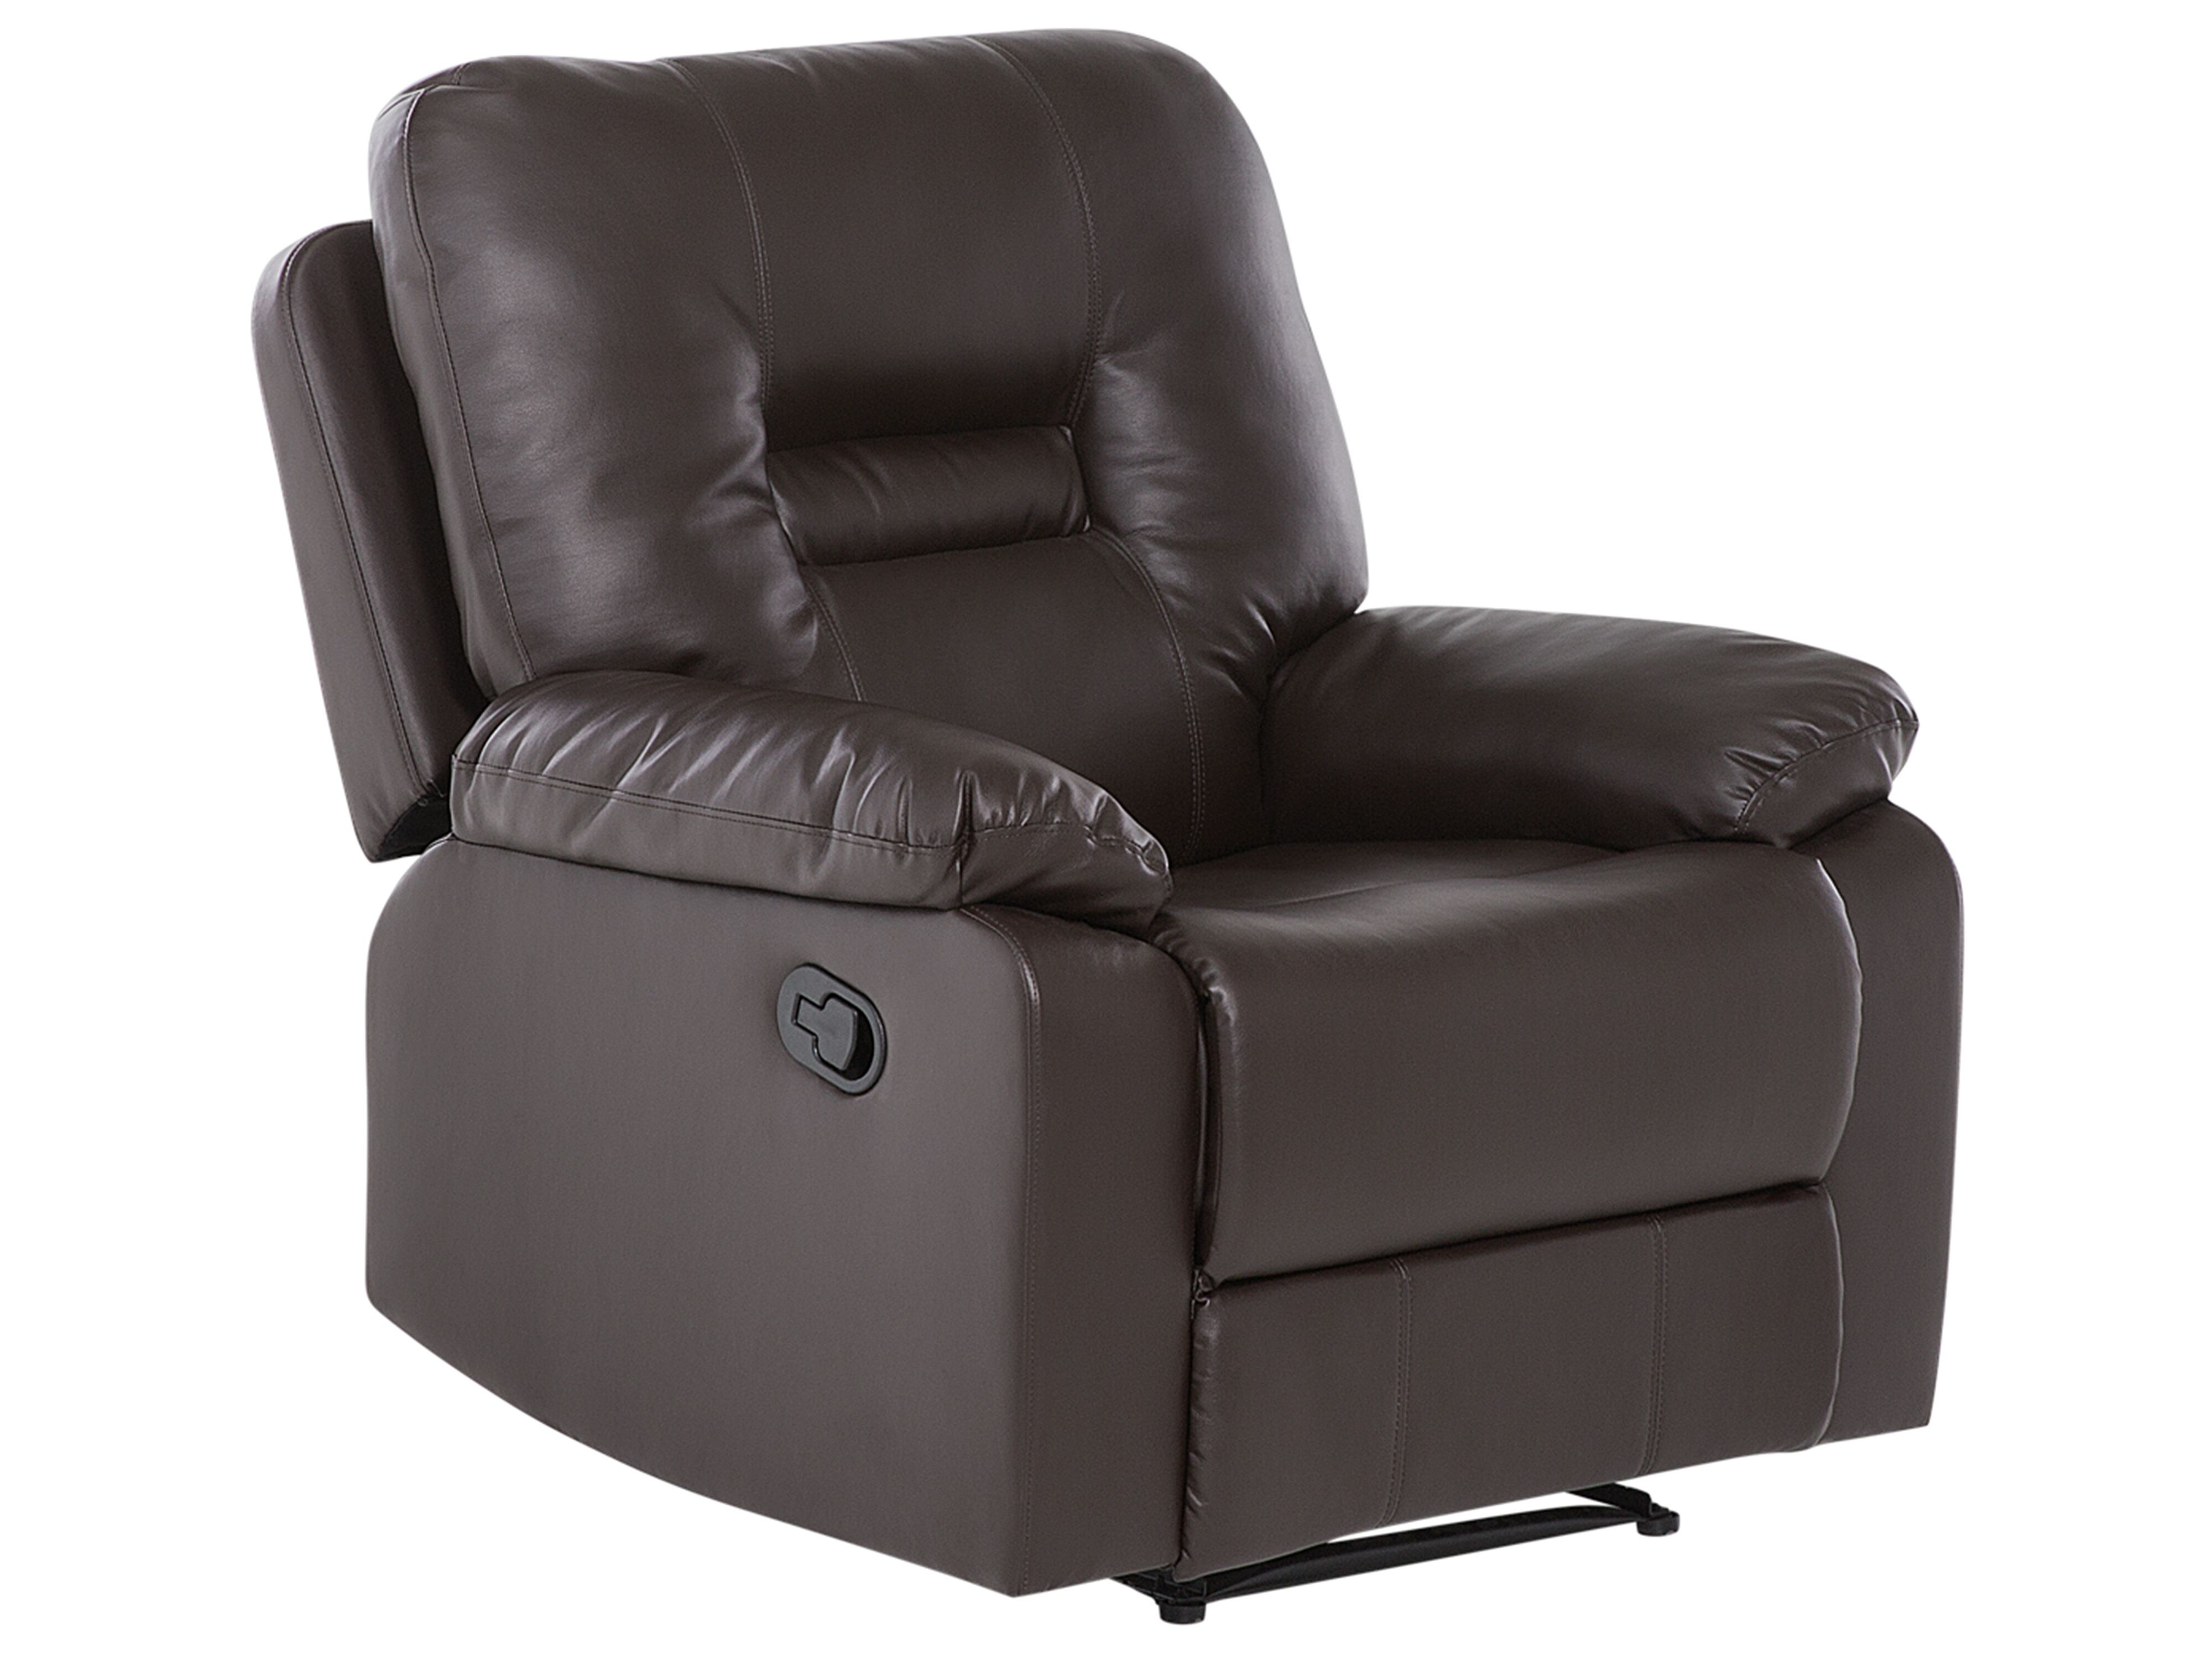 Faux Leather Recliner Chair Brown, Brown Faux Leather Recliner Chair